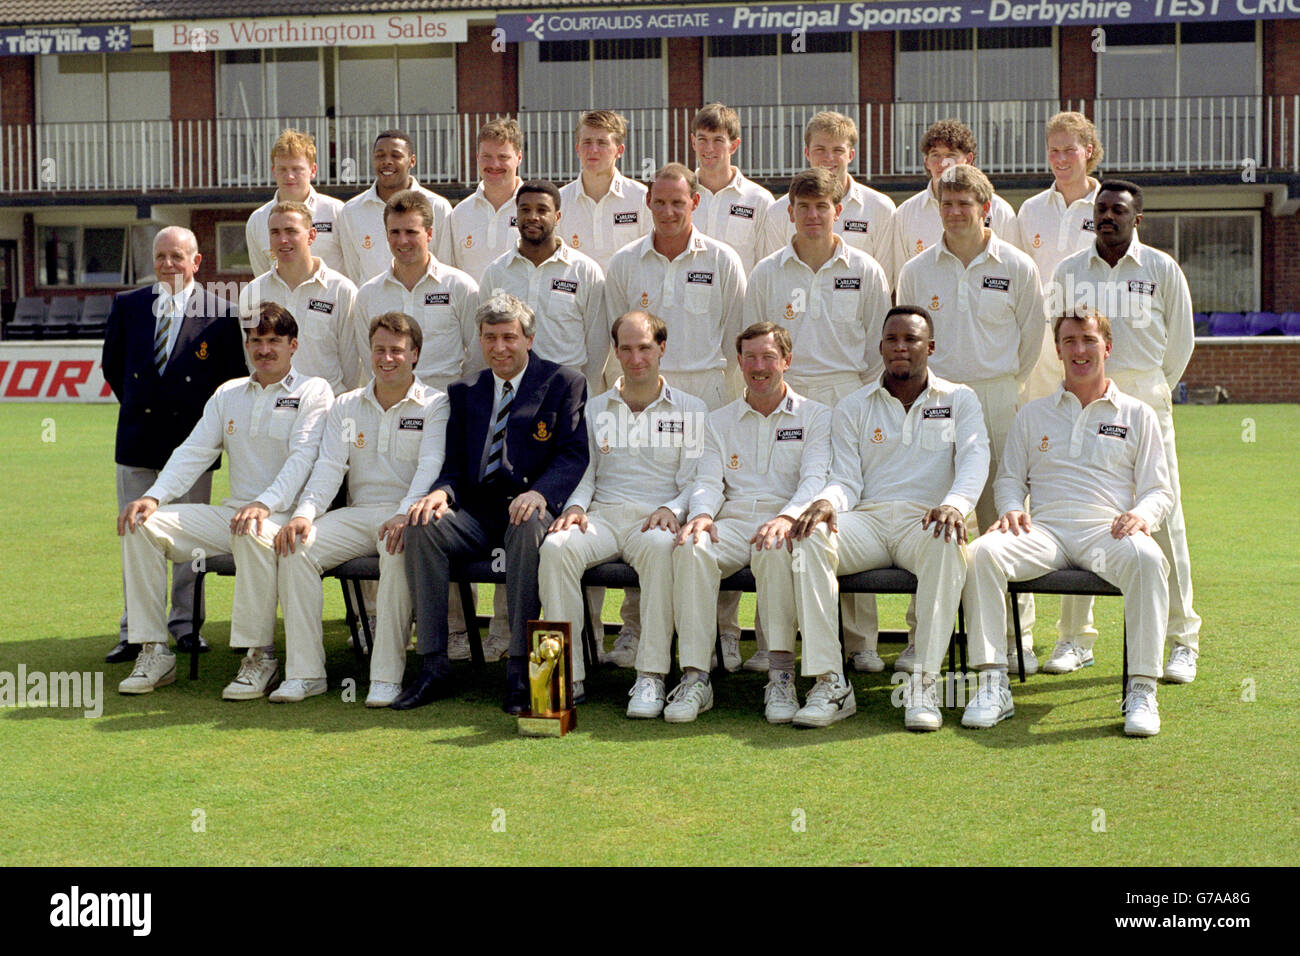 DERBYSHIRE COUNTY CRICKET CLUB PHOTOCALL. TEAM GROUP SHOT - WEARING WHITES, TRACK SUITS AND BLAZERS. Z4 Stock Photo